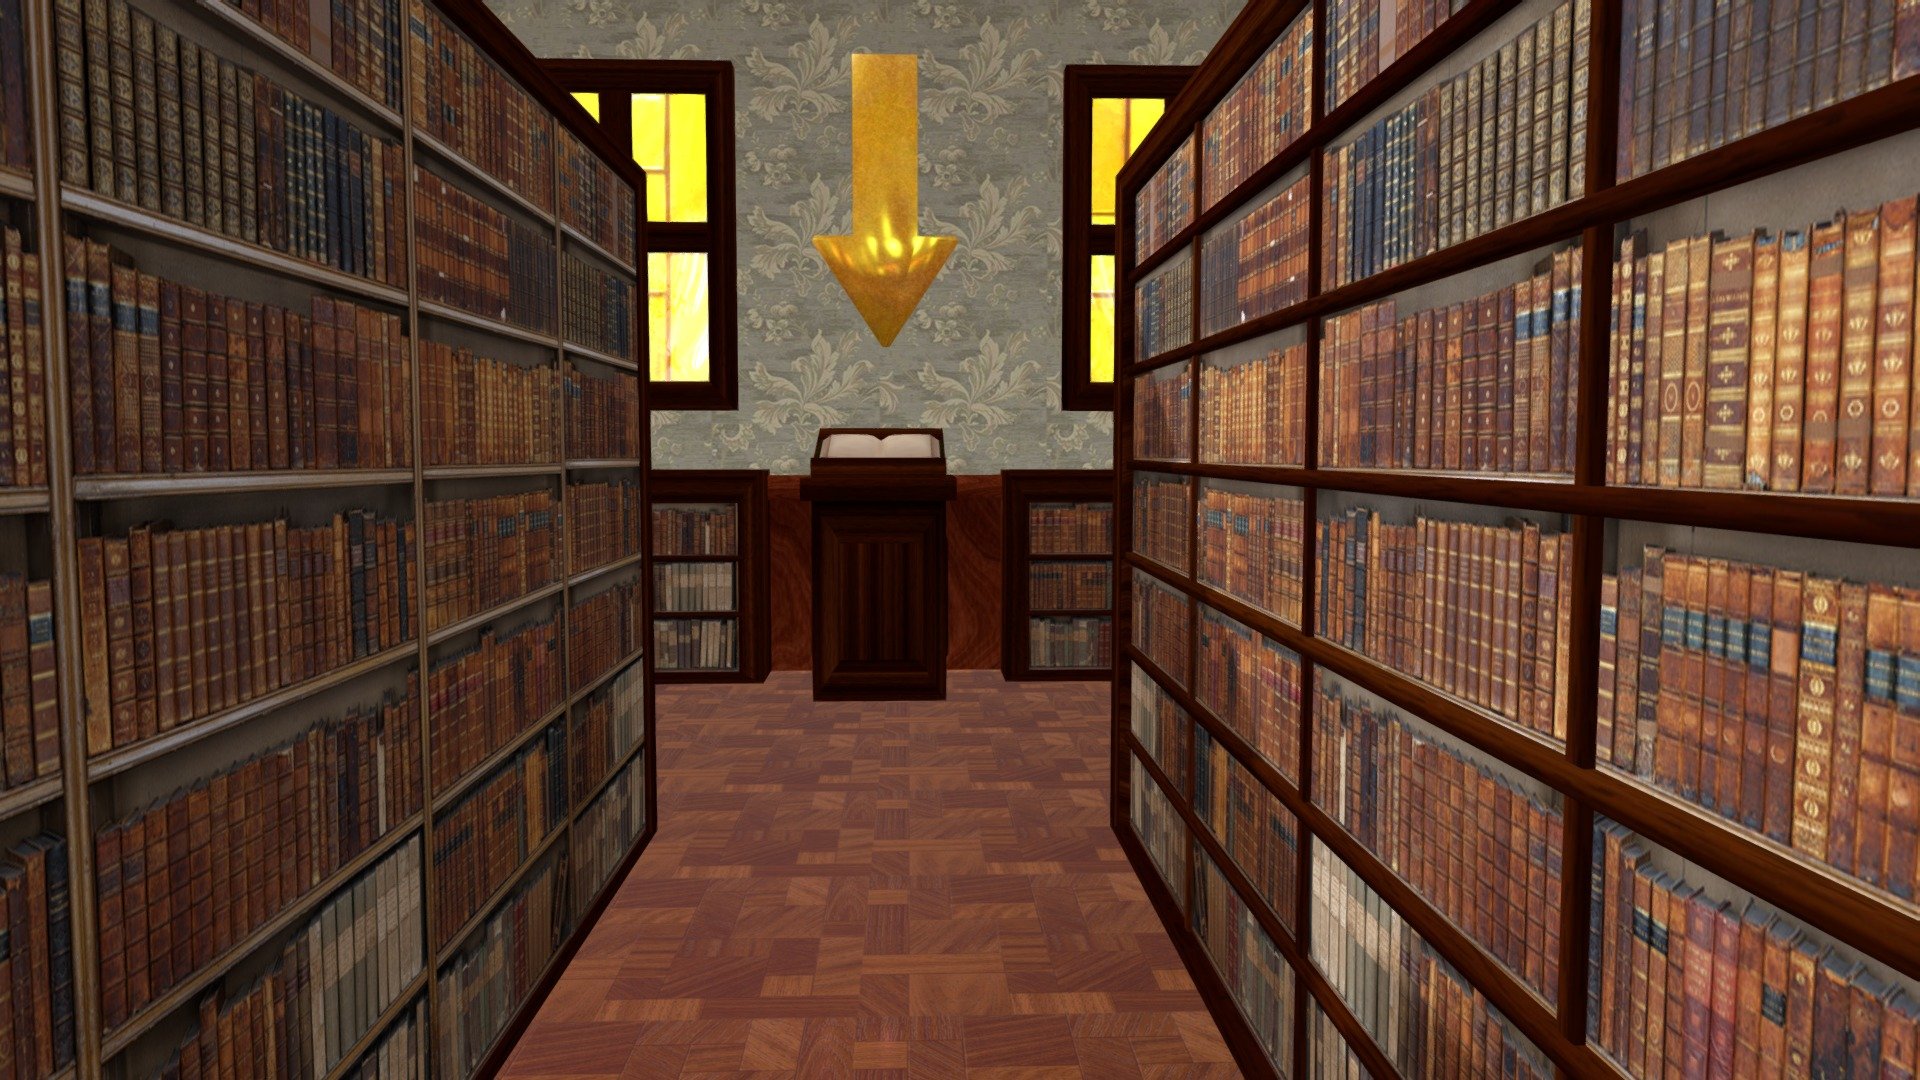 This is a simple low-poly model of the interior of a library, which I made during my time studying 3D animation at UW-Whitewater. This set was originally supposed to be used in an edutainment game of sorts made with Unity, which would explain both the arrow and the low polygon count and the simple textures (we didn't know how big this was going to be, so we started small). We were thinking of a MYST-like first person adventure game where the player would explore a library alone to search for clues and solve puzzles. Unfortunately, in the end, the game got scrapped for some reason 3d model